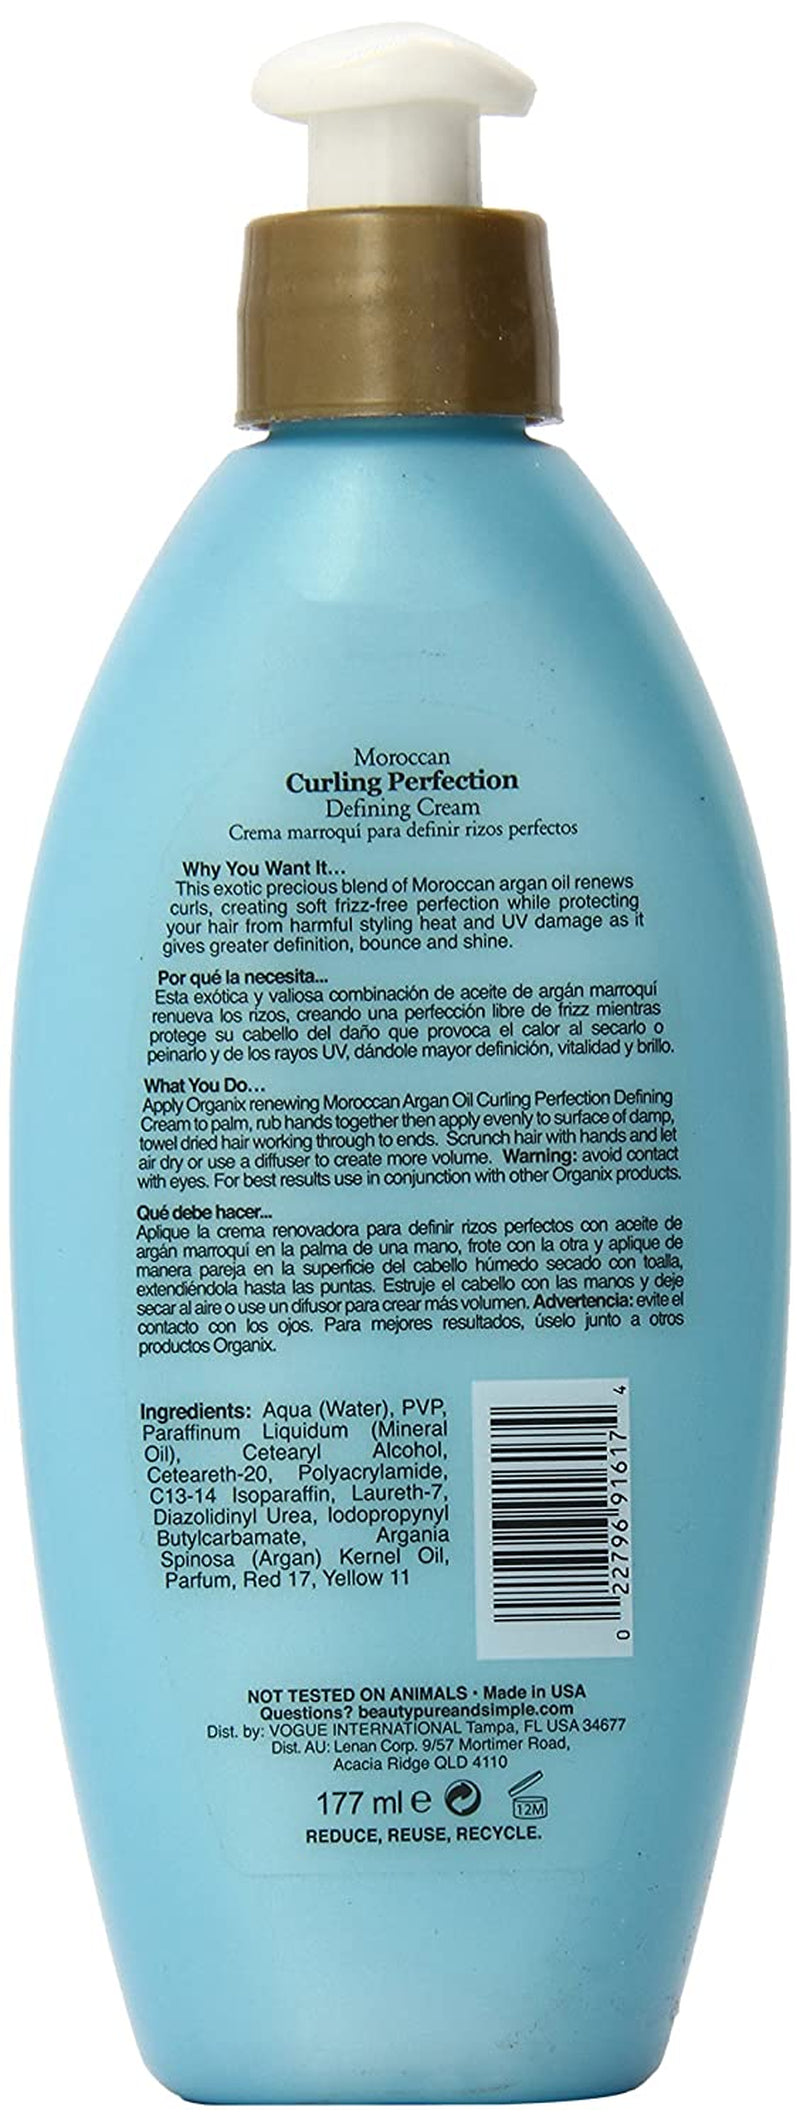 Argan Oil Curl Defining Cream - Smooth, Define, and Tame Frizz for All Hair Type